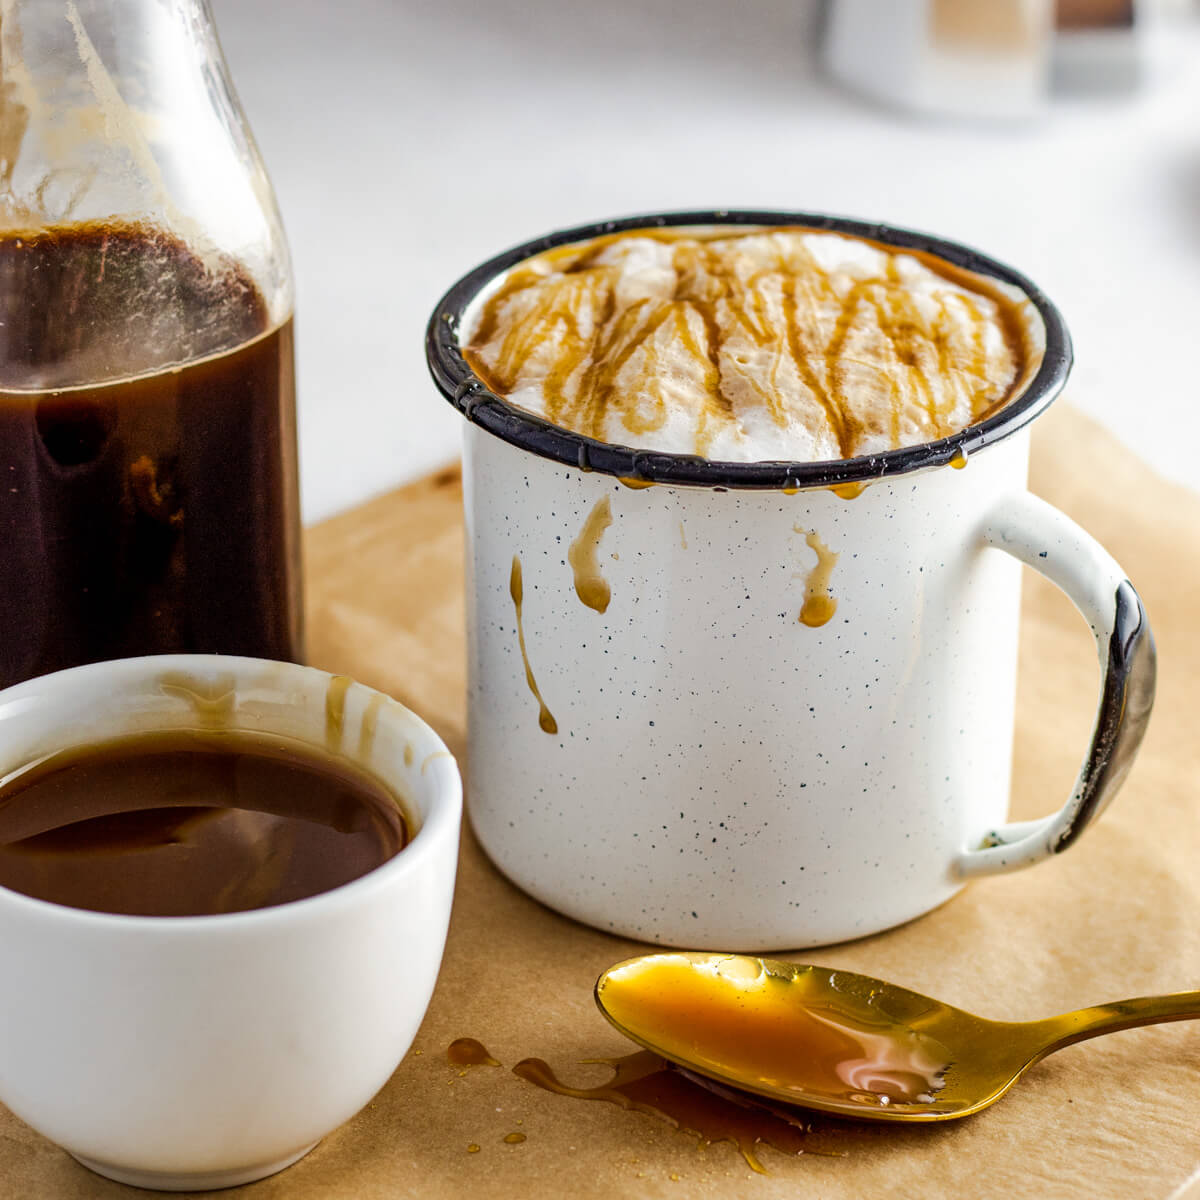 A white mug holds a foamy Caramel Macchiato garnished with a golden caramel drizzle.